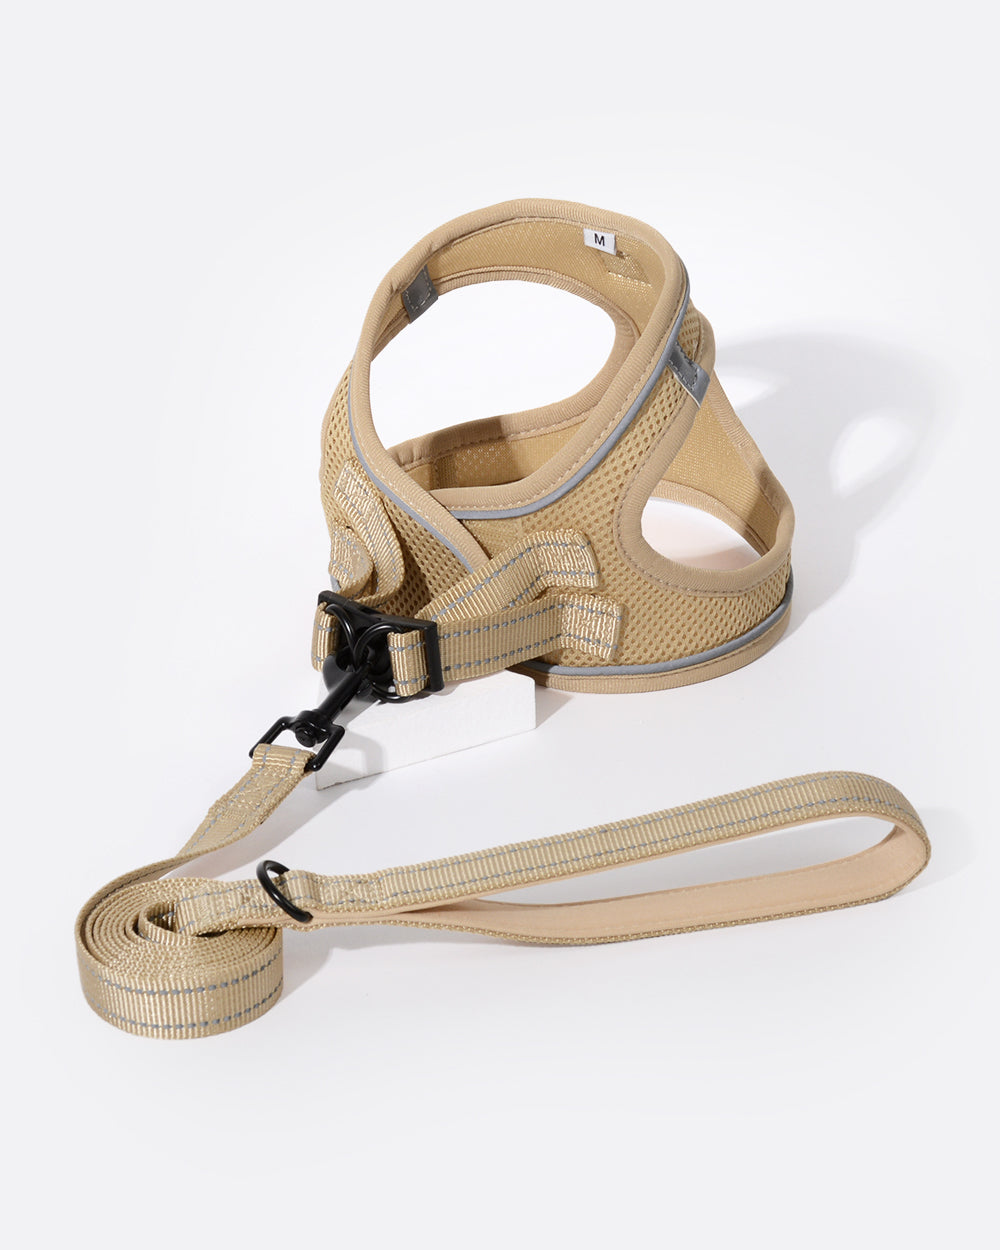 OxyMesh Step-in Harness and Leash Set - Tan